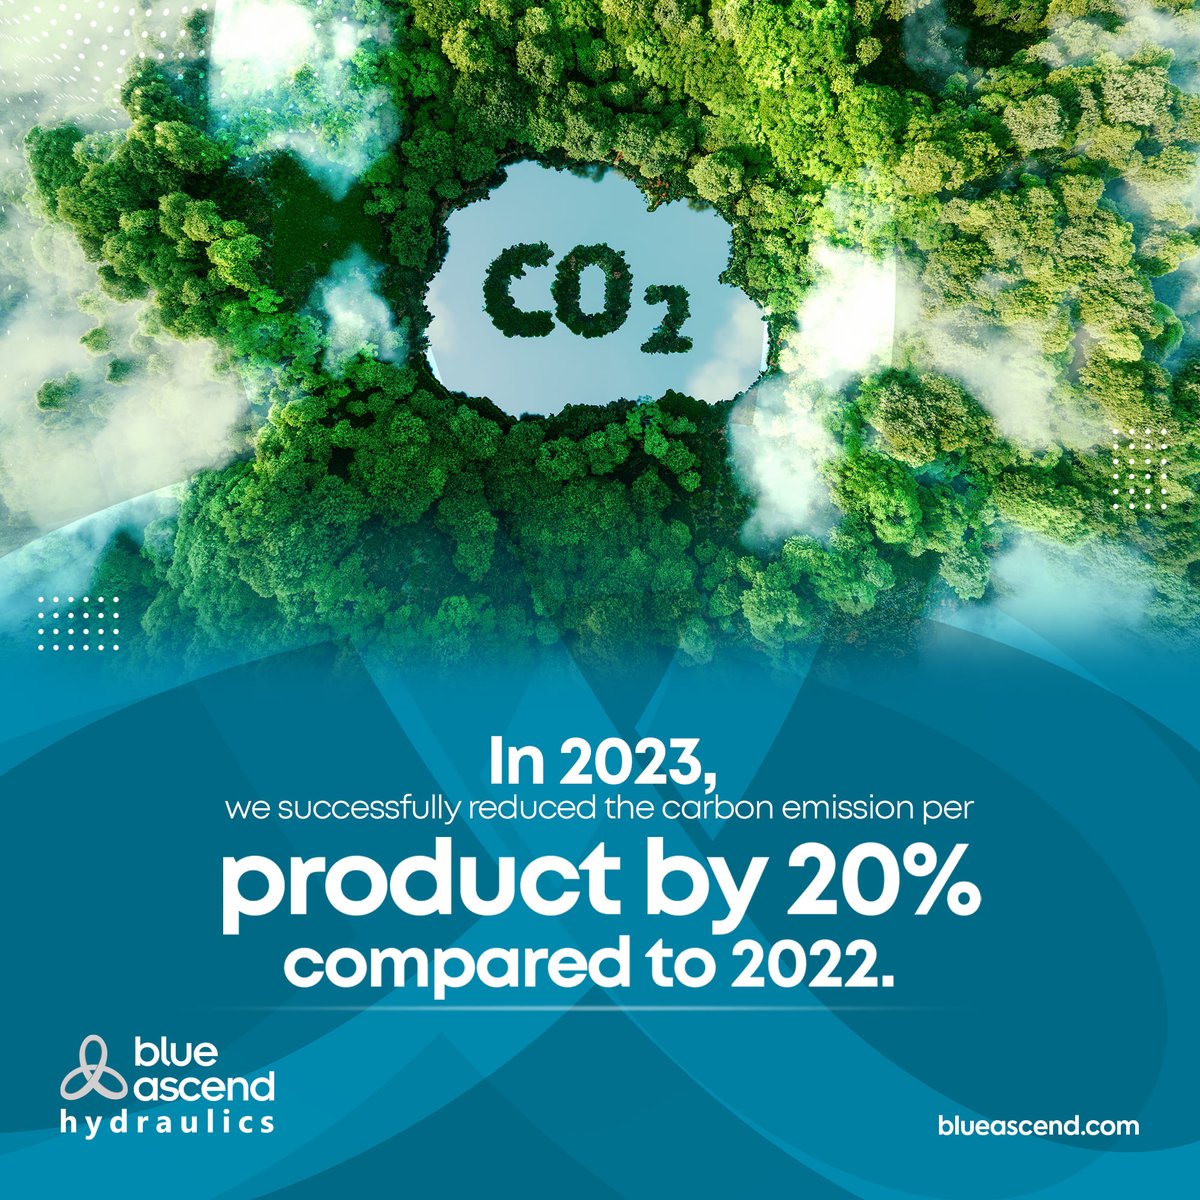 In 2023, we achieved a 20% reduction in the carbon emission per product compared to 2022. In 2024, we will persist in preserving the environment by decreasing the carbon footprint across all our processes.

#BlueAscend #Sustainability #Environment #ProtecttheEnvironment